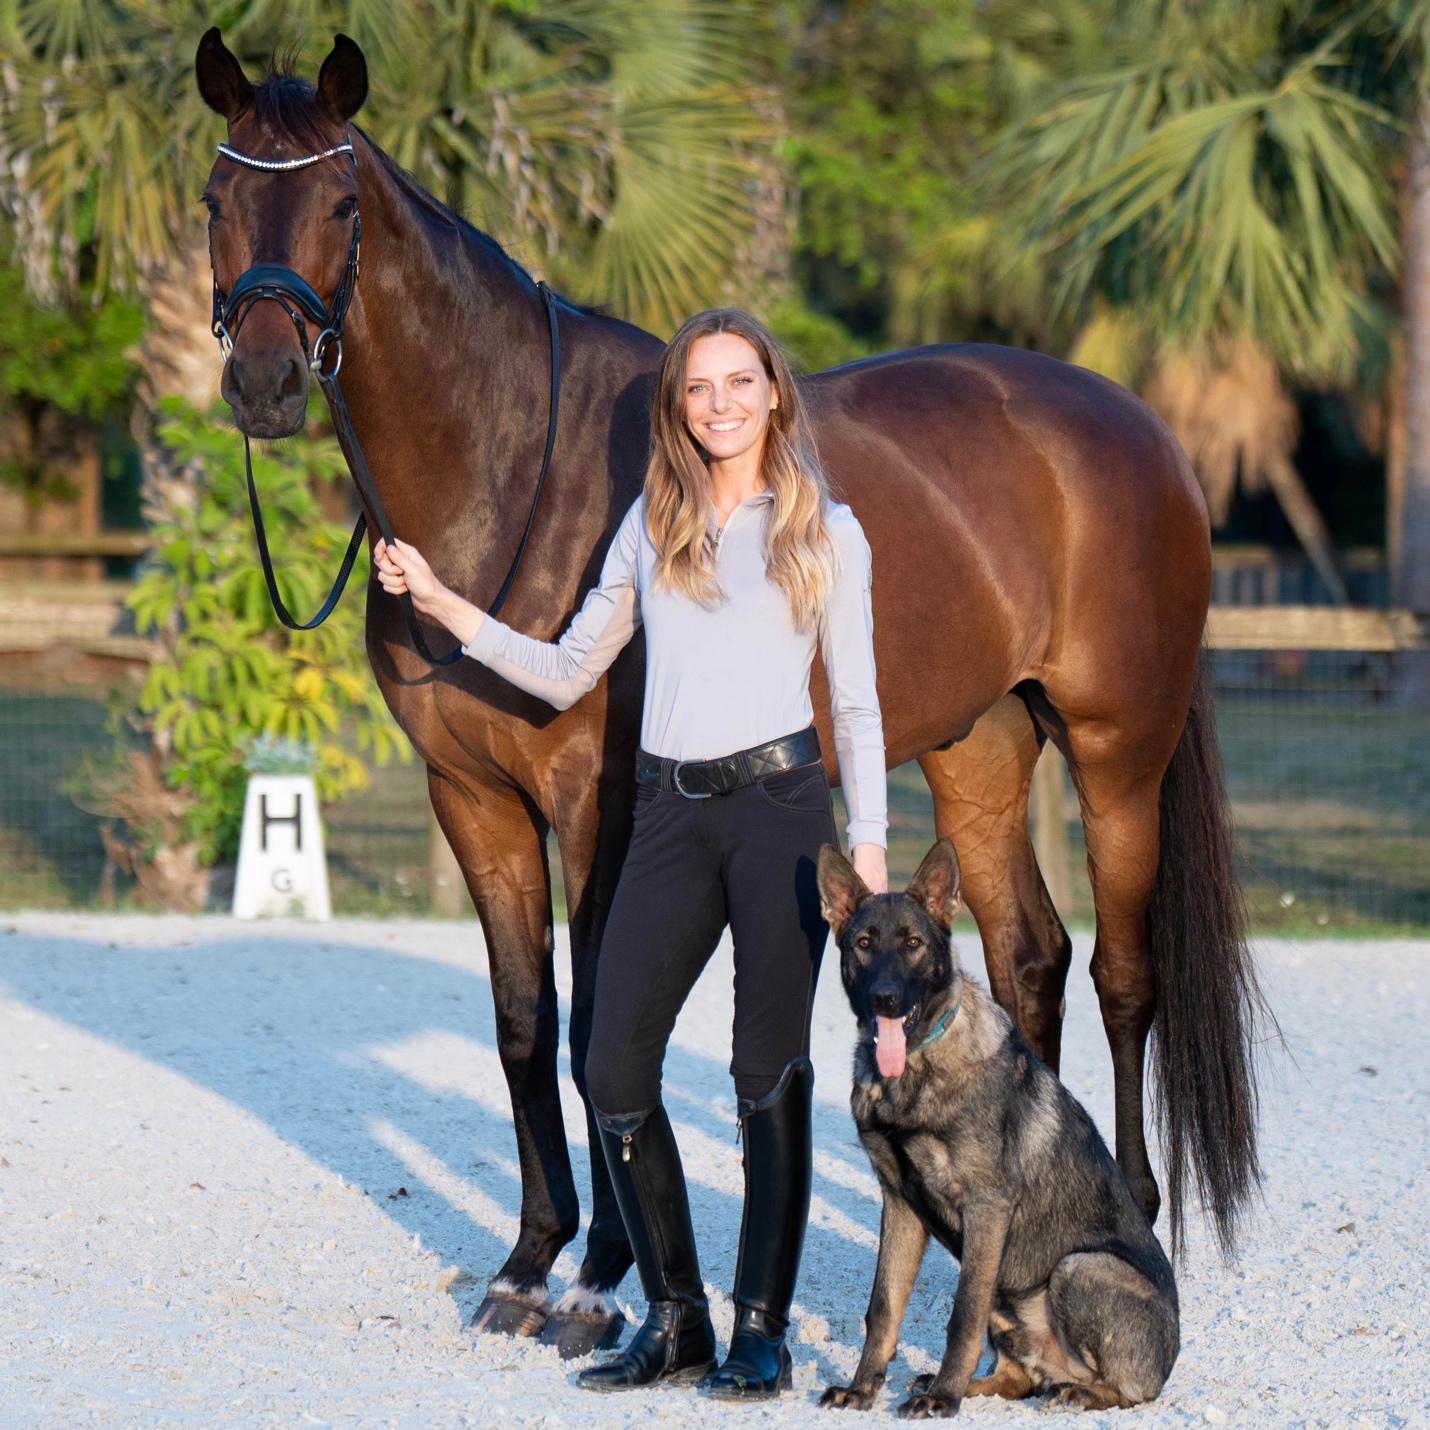 Megan Shea Coccia Megan is the resident trainer at Beachwood's Wellington, FL location and enjoys working with our talented therapy horses on their continued dressage training.